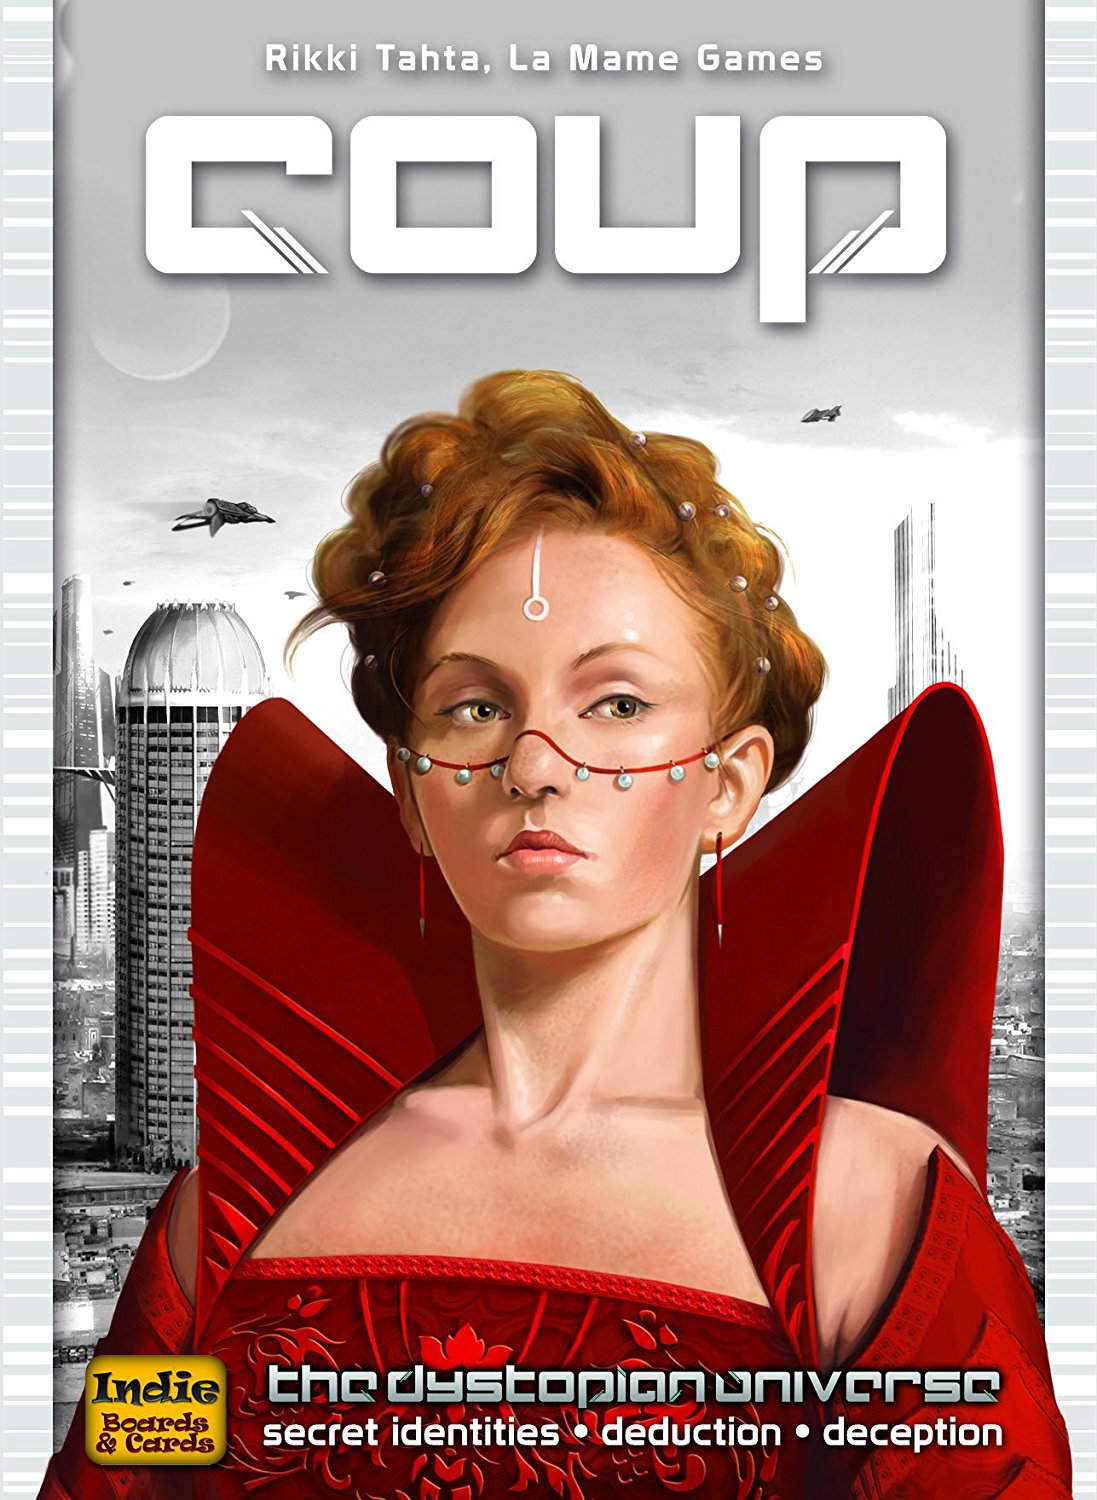 COUP - The Resistance Game Coup